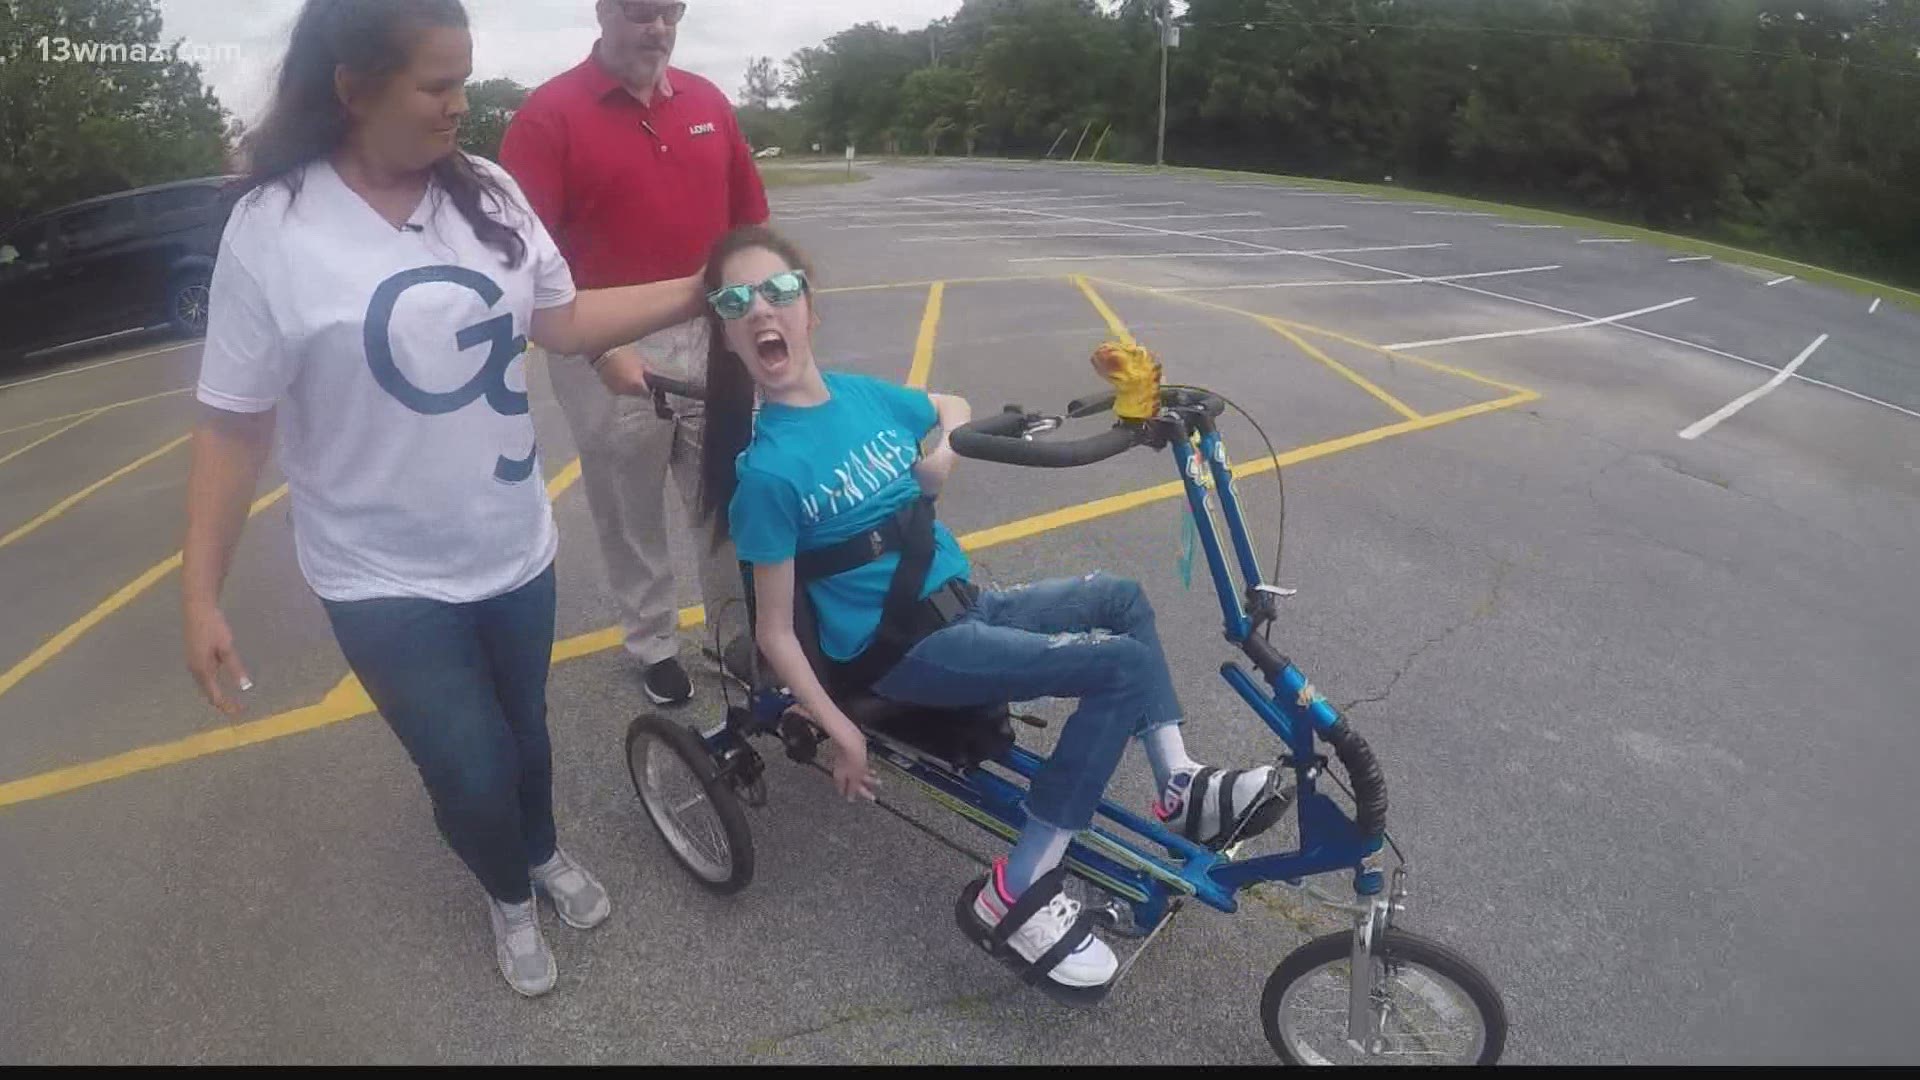 Riding a bike for the first time is a milestone for most children, but for one 15-year-old girl it wasn't even possible – until now.